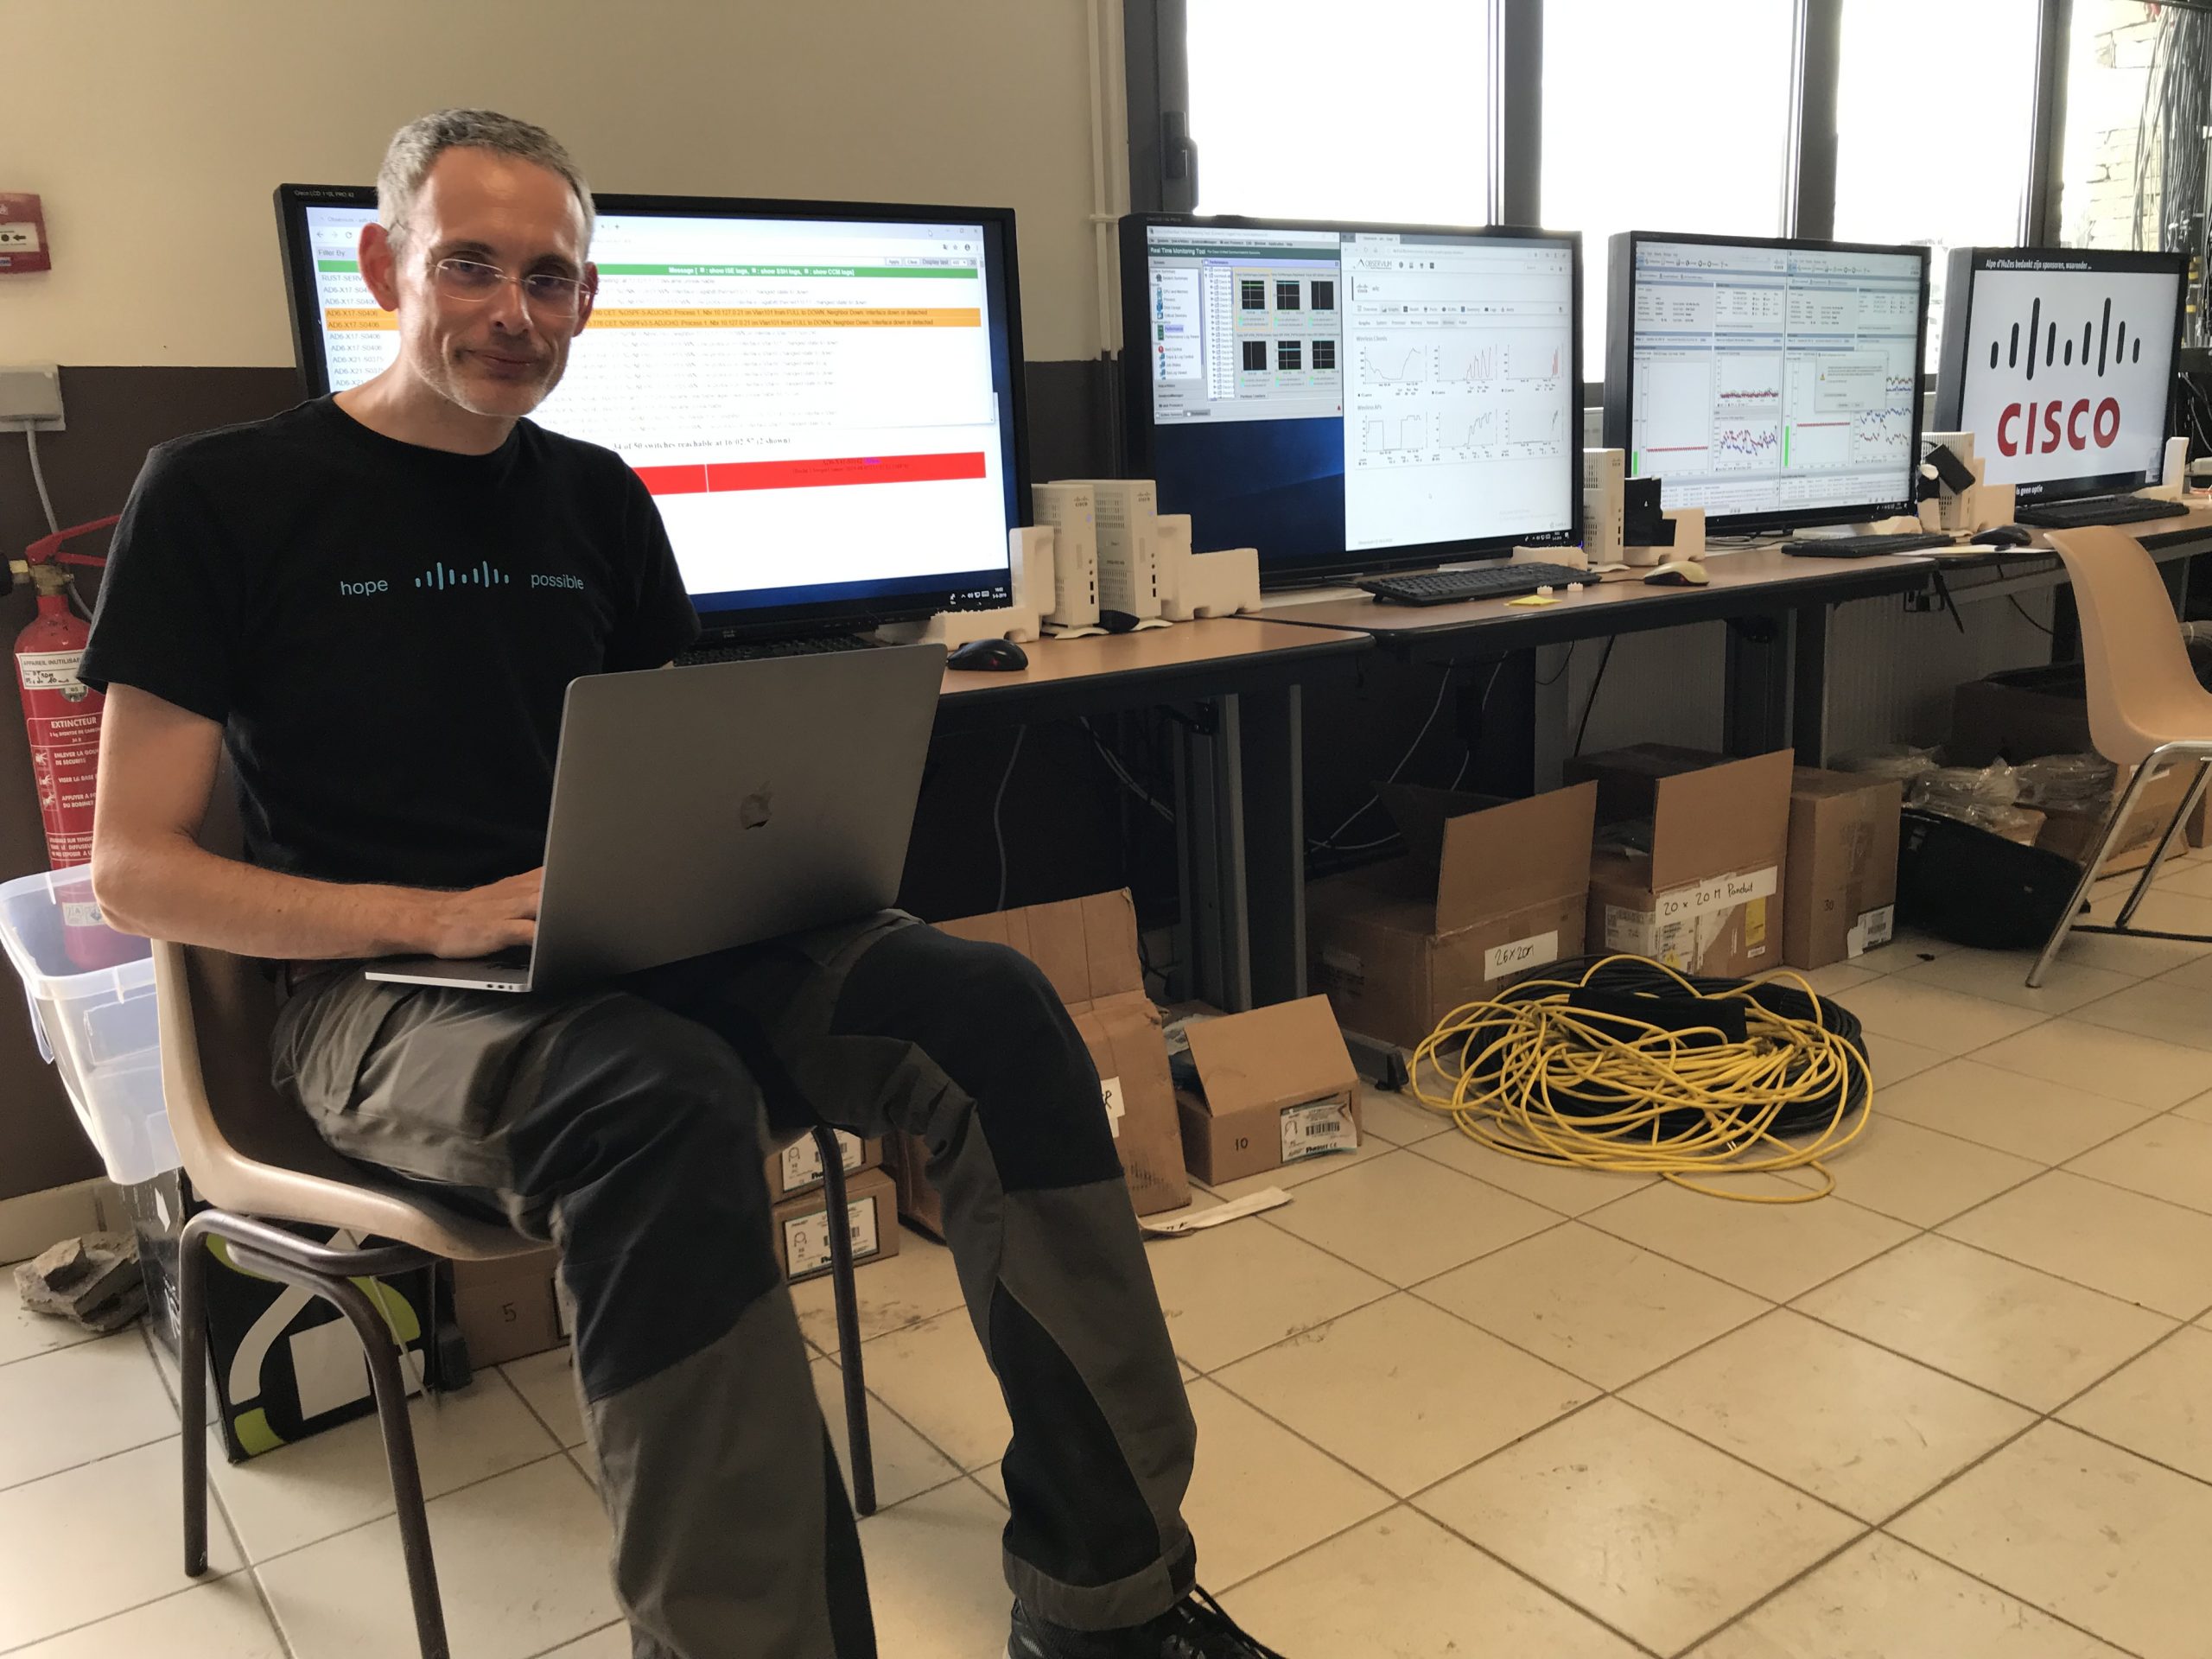 Mark sits with his laptop on his lap and a series of large monitors behind him at the network operating center for the Alpe d’HuZes event.